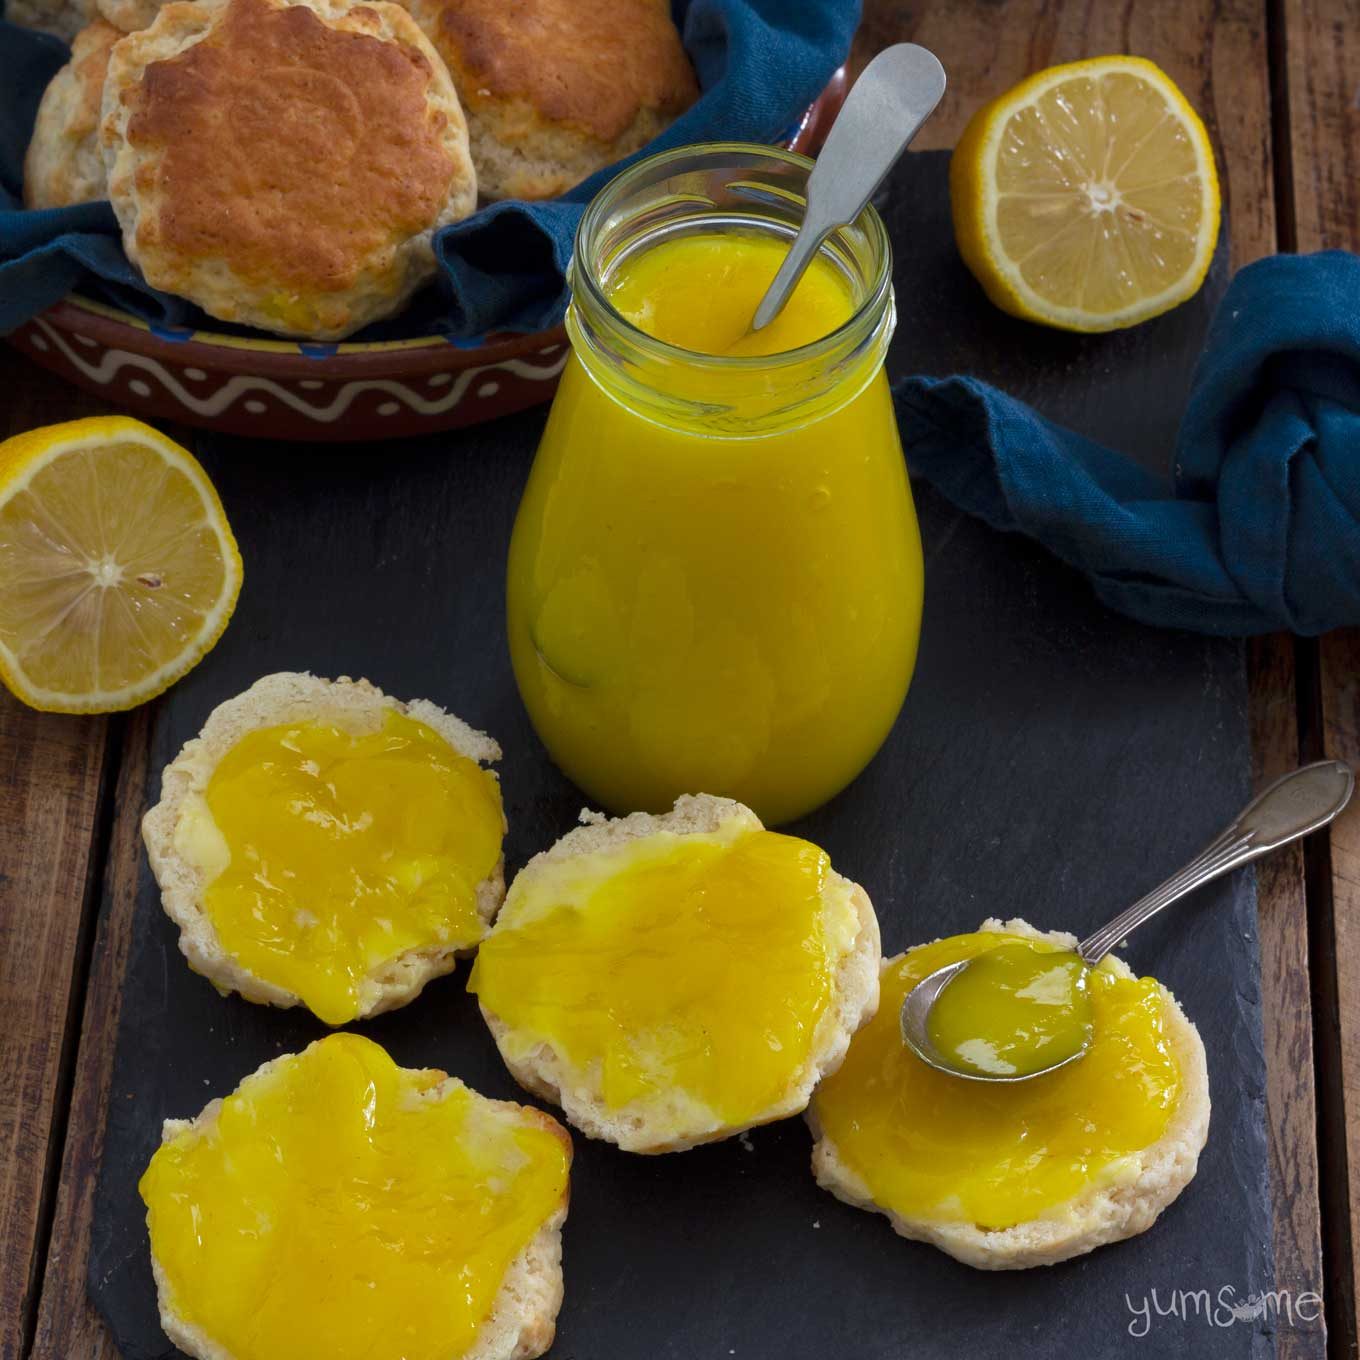 Some scones spread with lemon curd - one has a silver spoon resting on it. A jar of lemon curd, and more scones are in the background.